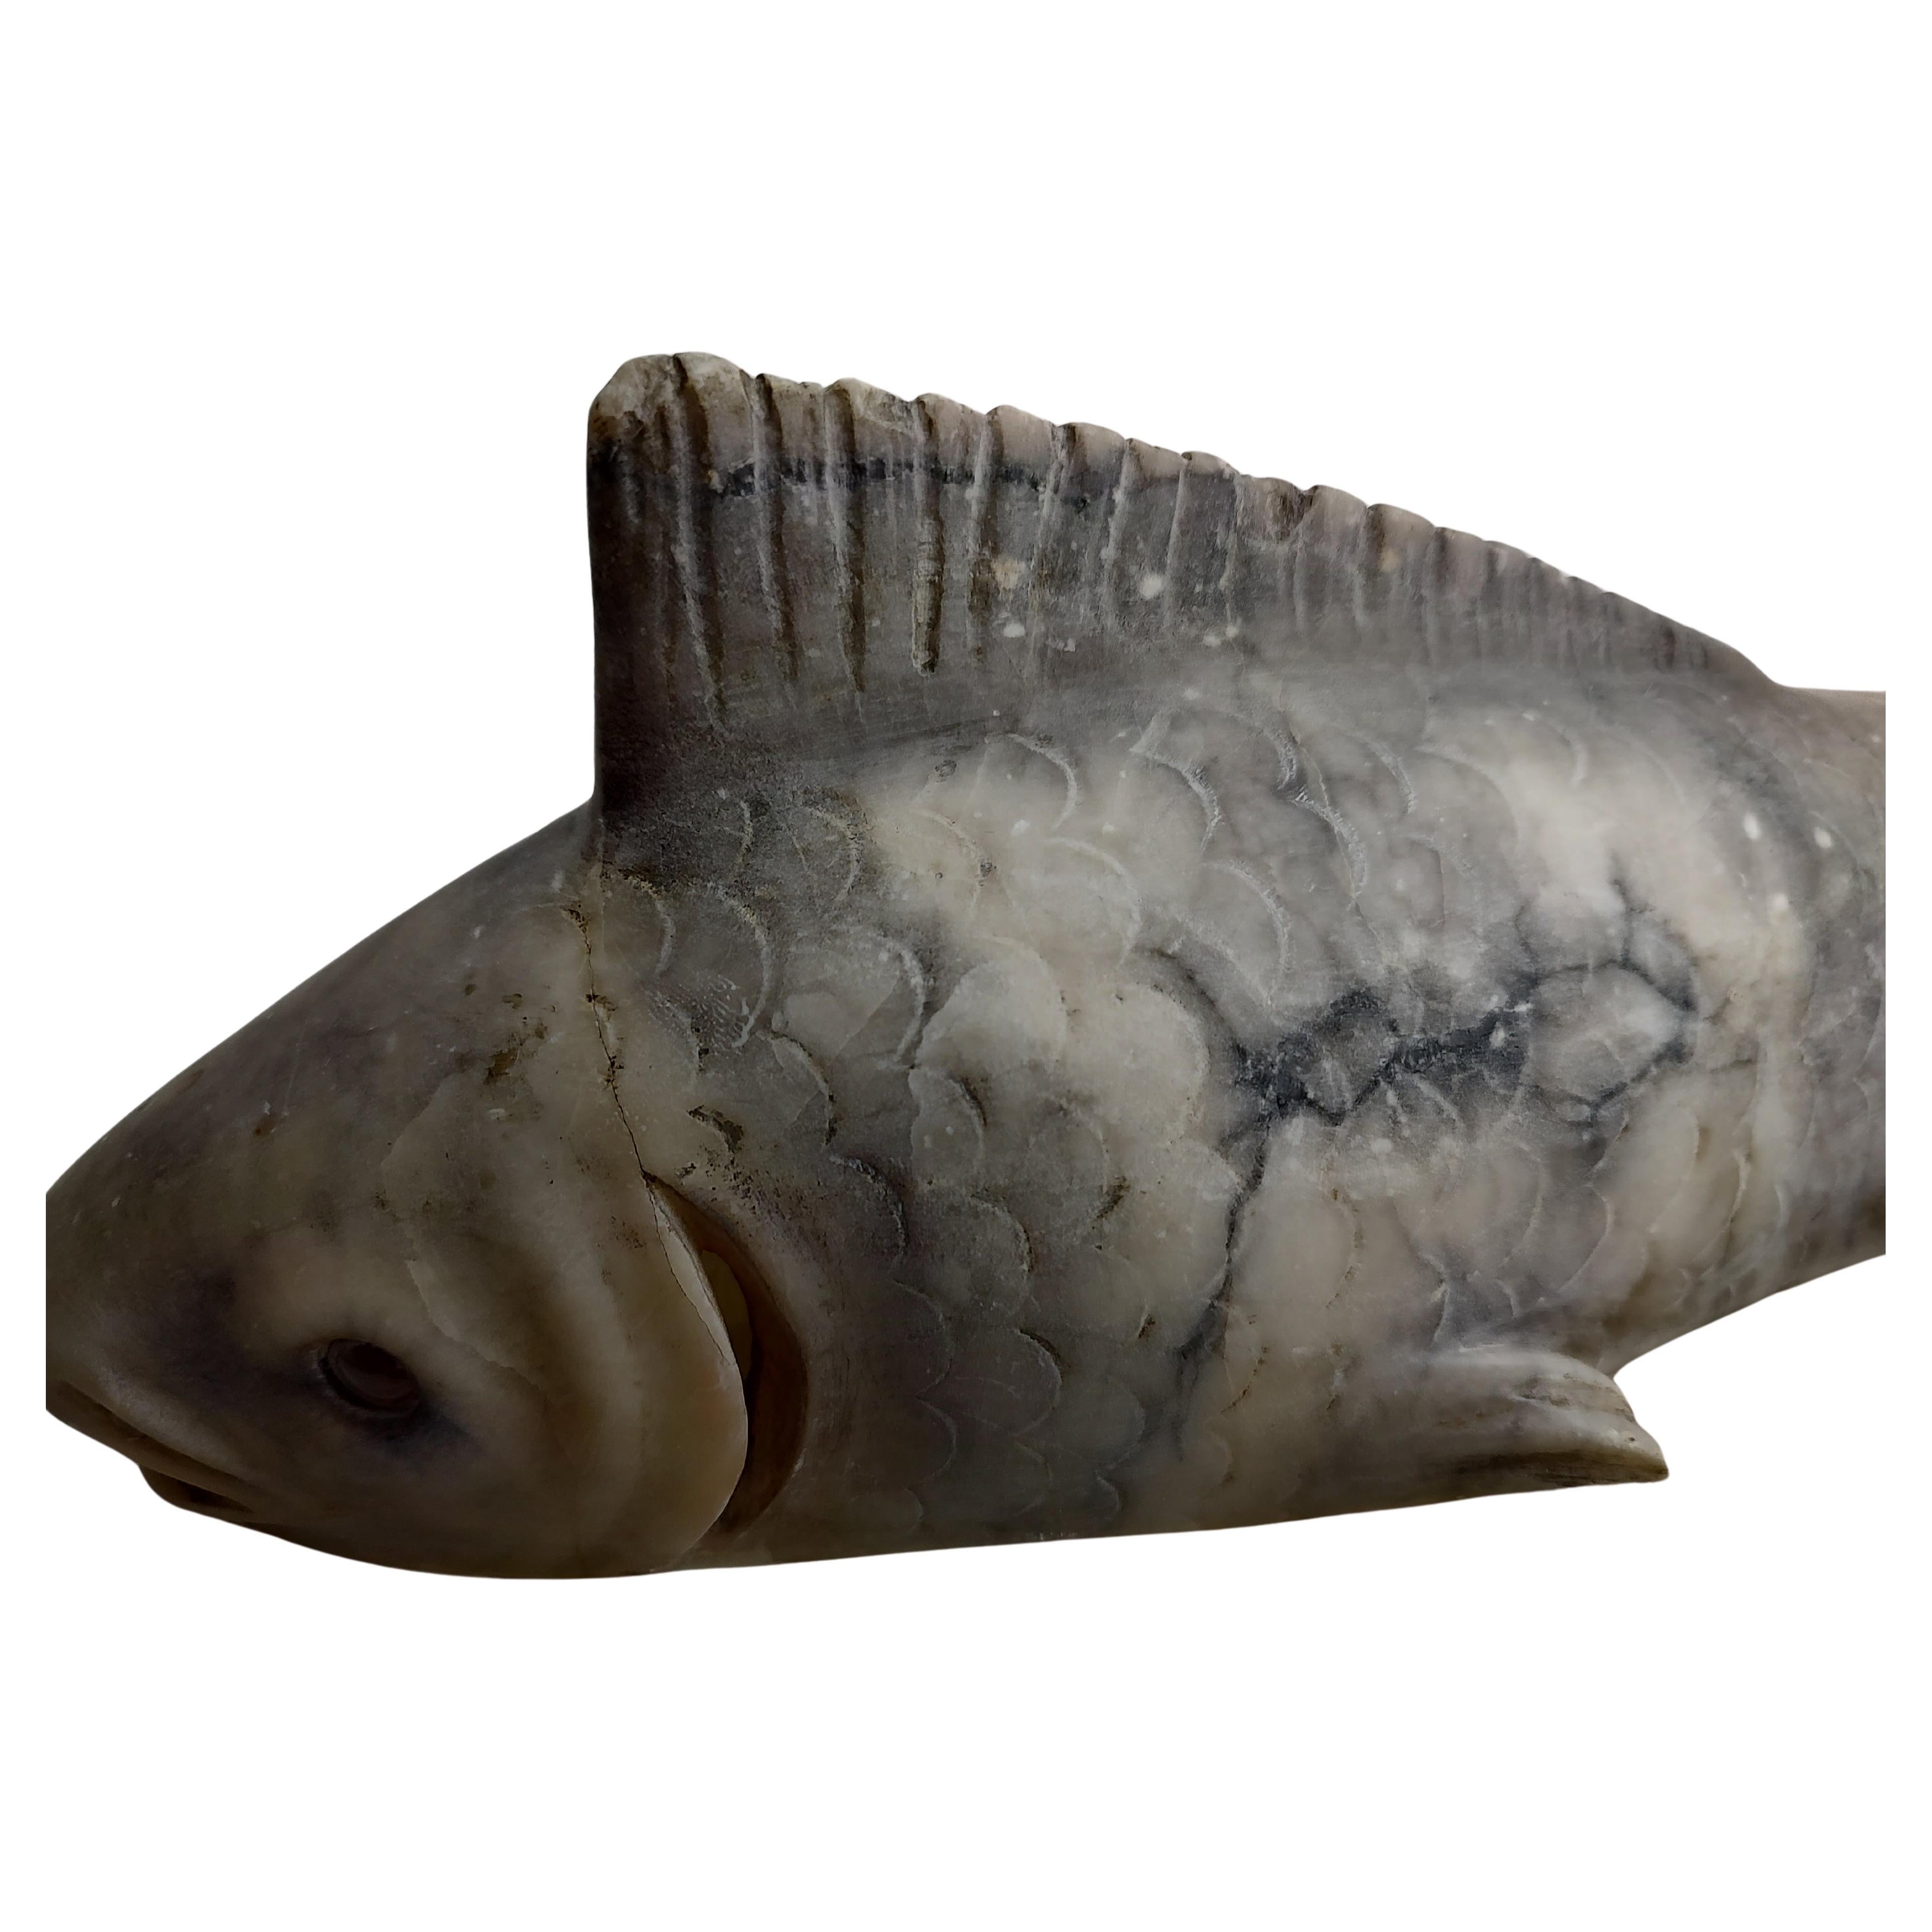 Fabulous fish night light table lamp. Carved from alabaster in two pieces. Fish sits in a carved cradle type form and secures it. Inline switch and when lit fishes eyes sparkle red. Base was professionally repaired. In excellent vintage condition